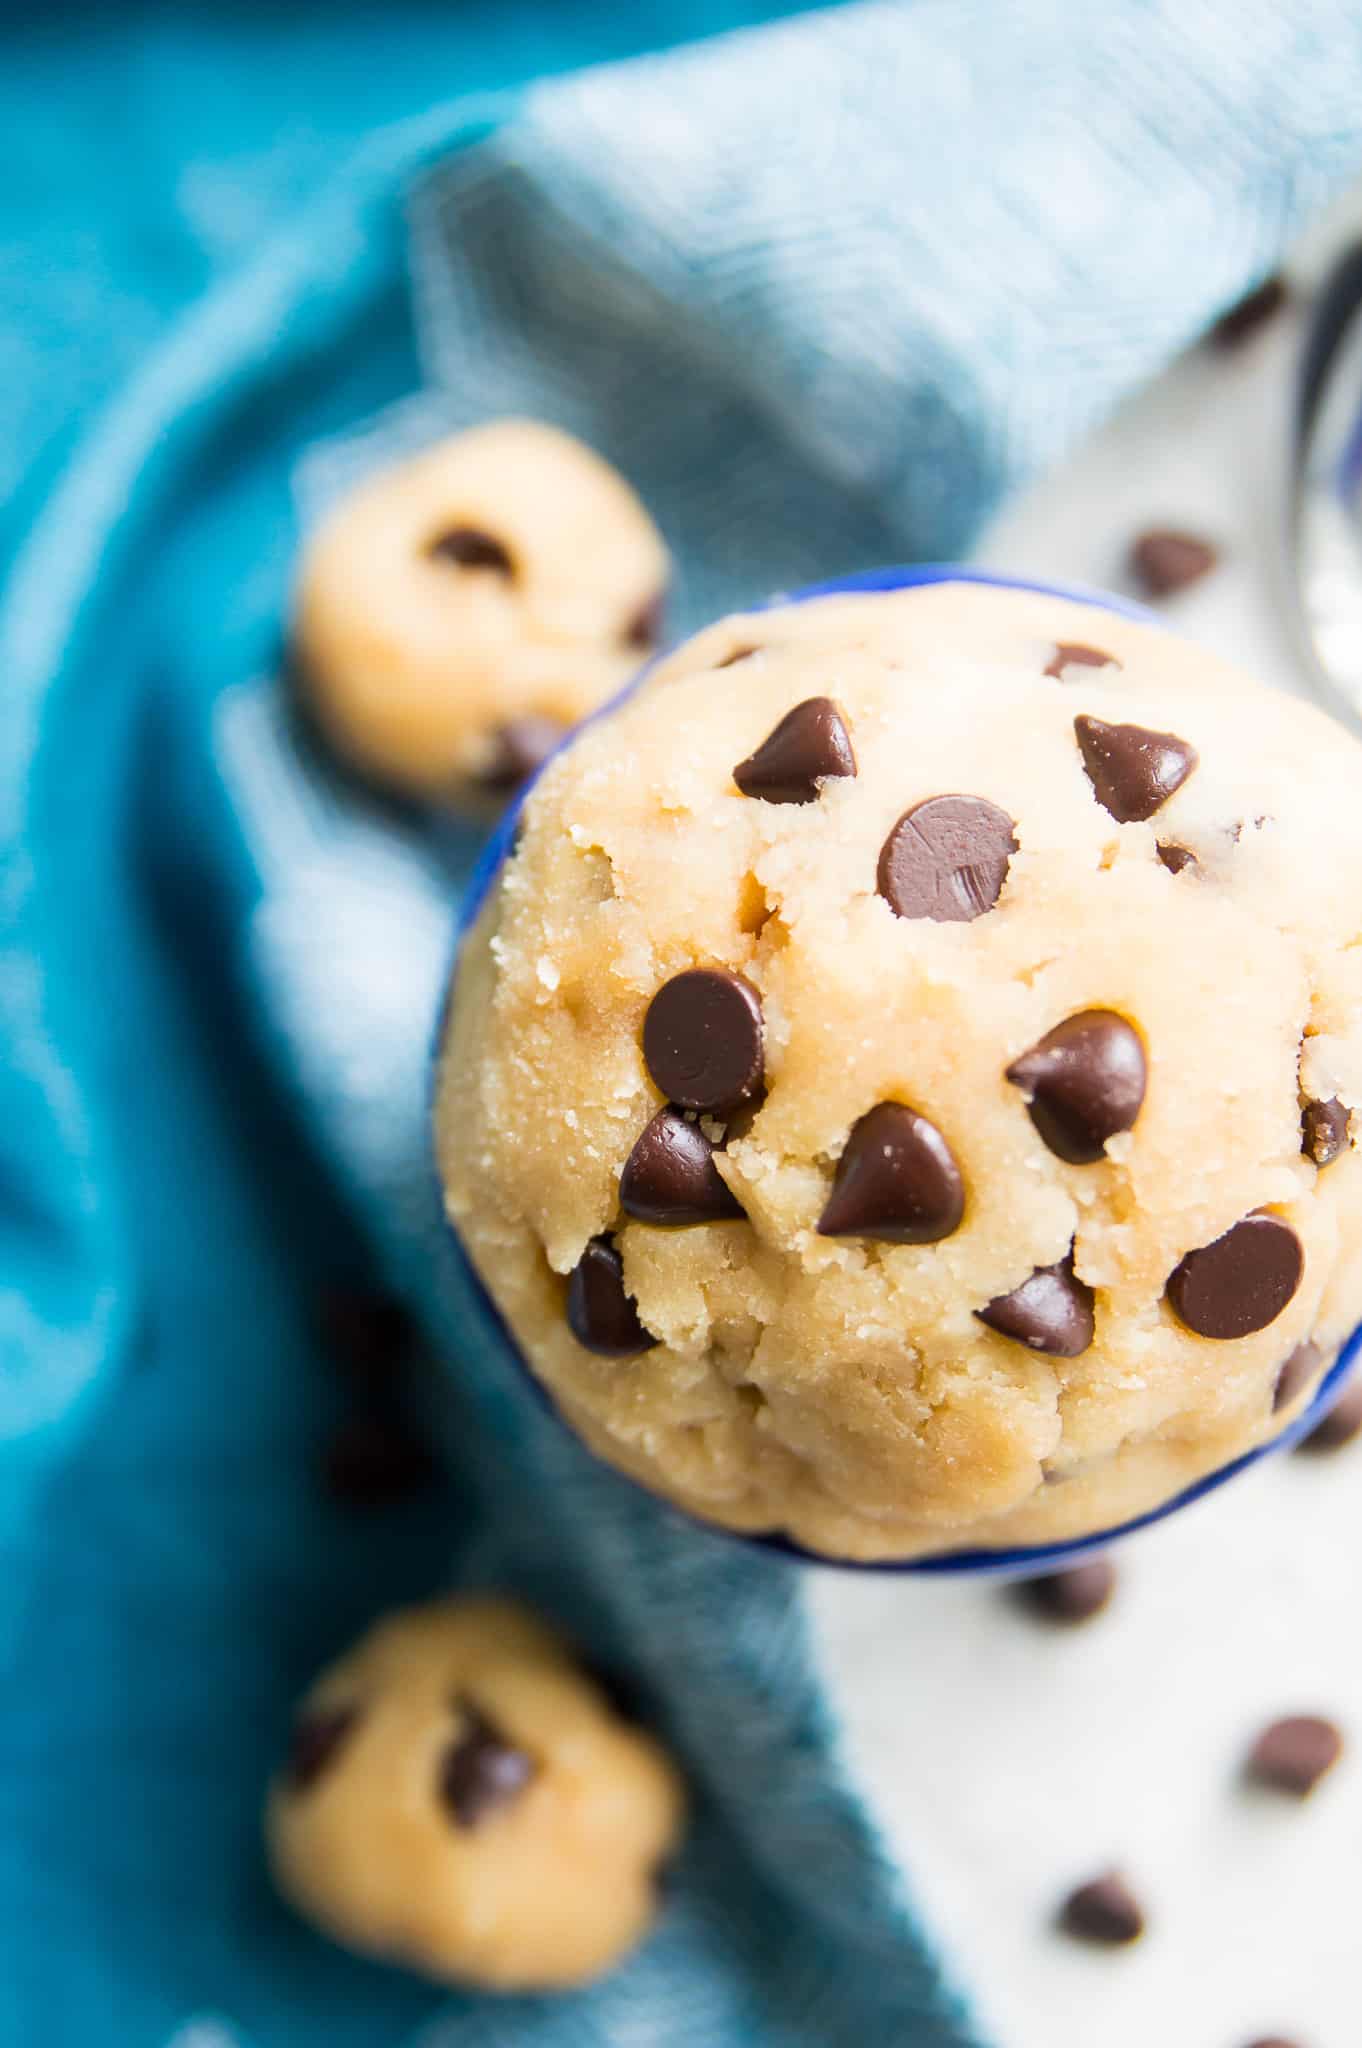 A large bowl of edible gluten free cookie dough with chocolate chips.